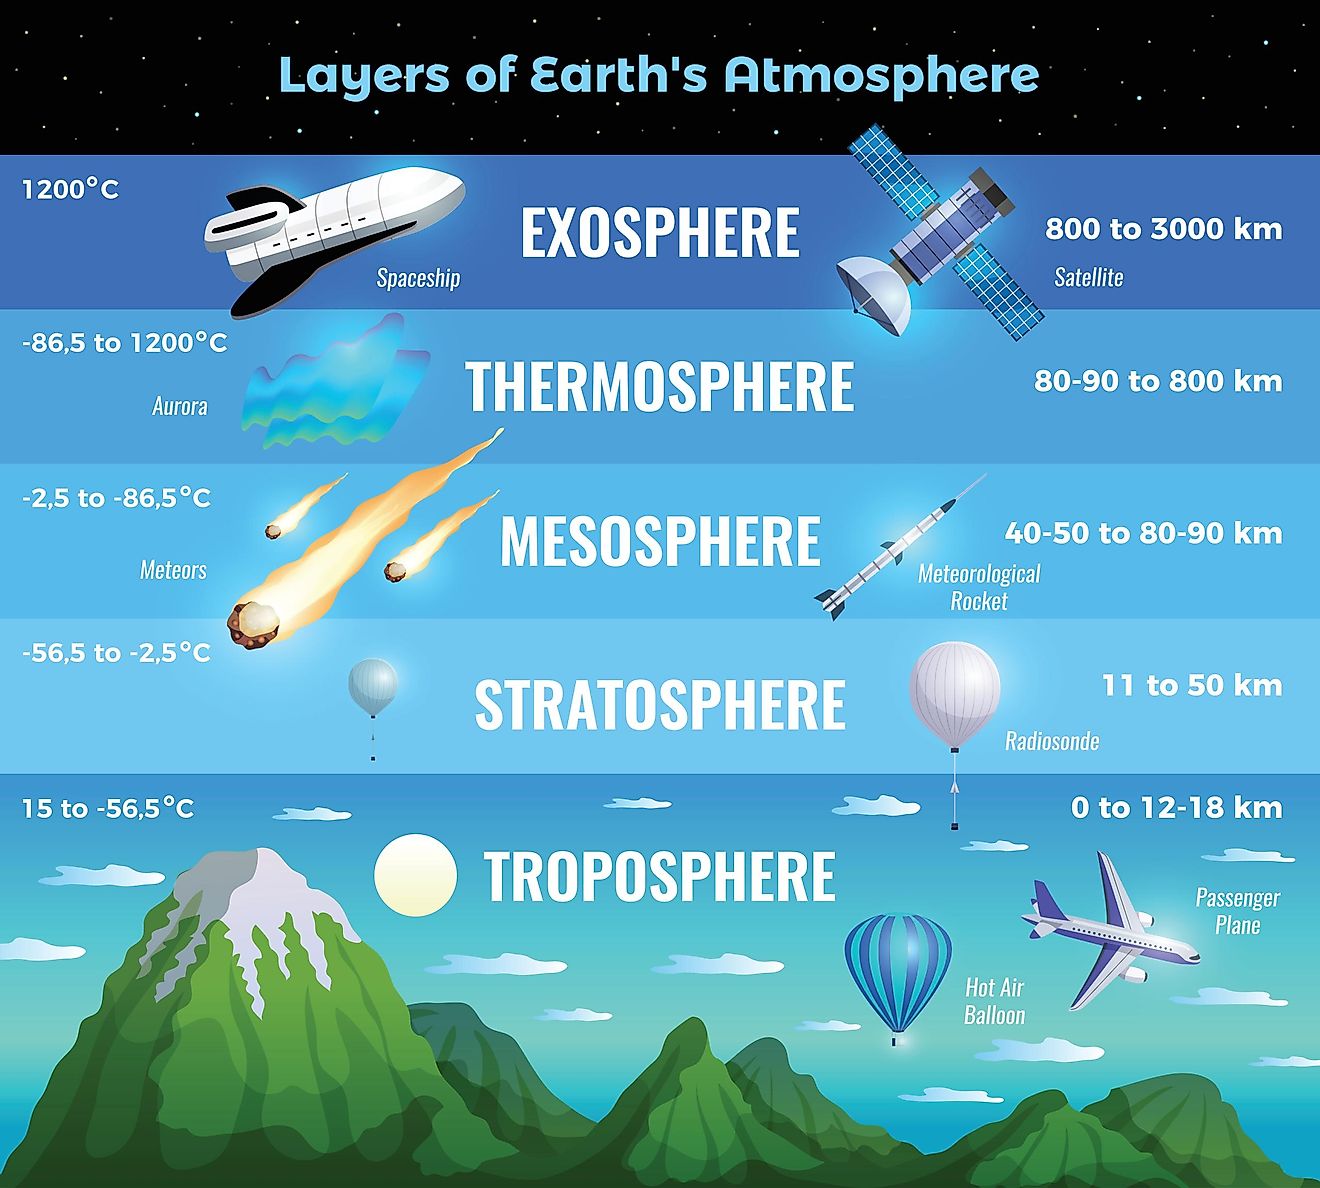 The easiest way to think about the atmosphere above our planet is to imagine an invisible shield that protects our planet from all the bad stuff that floats around in the universe.